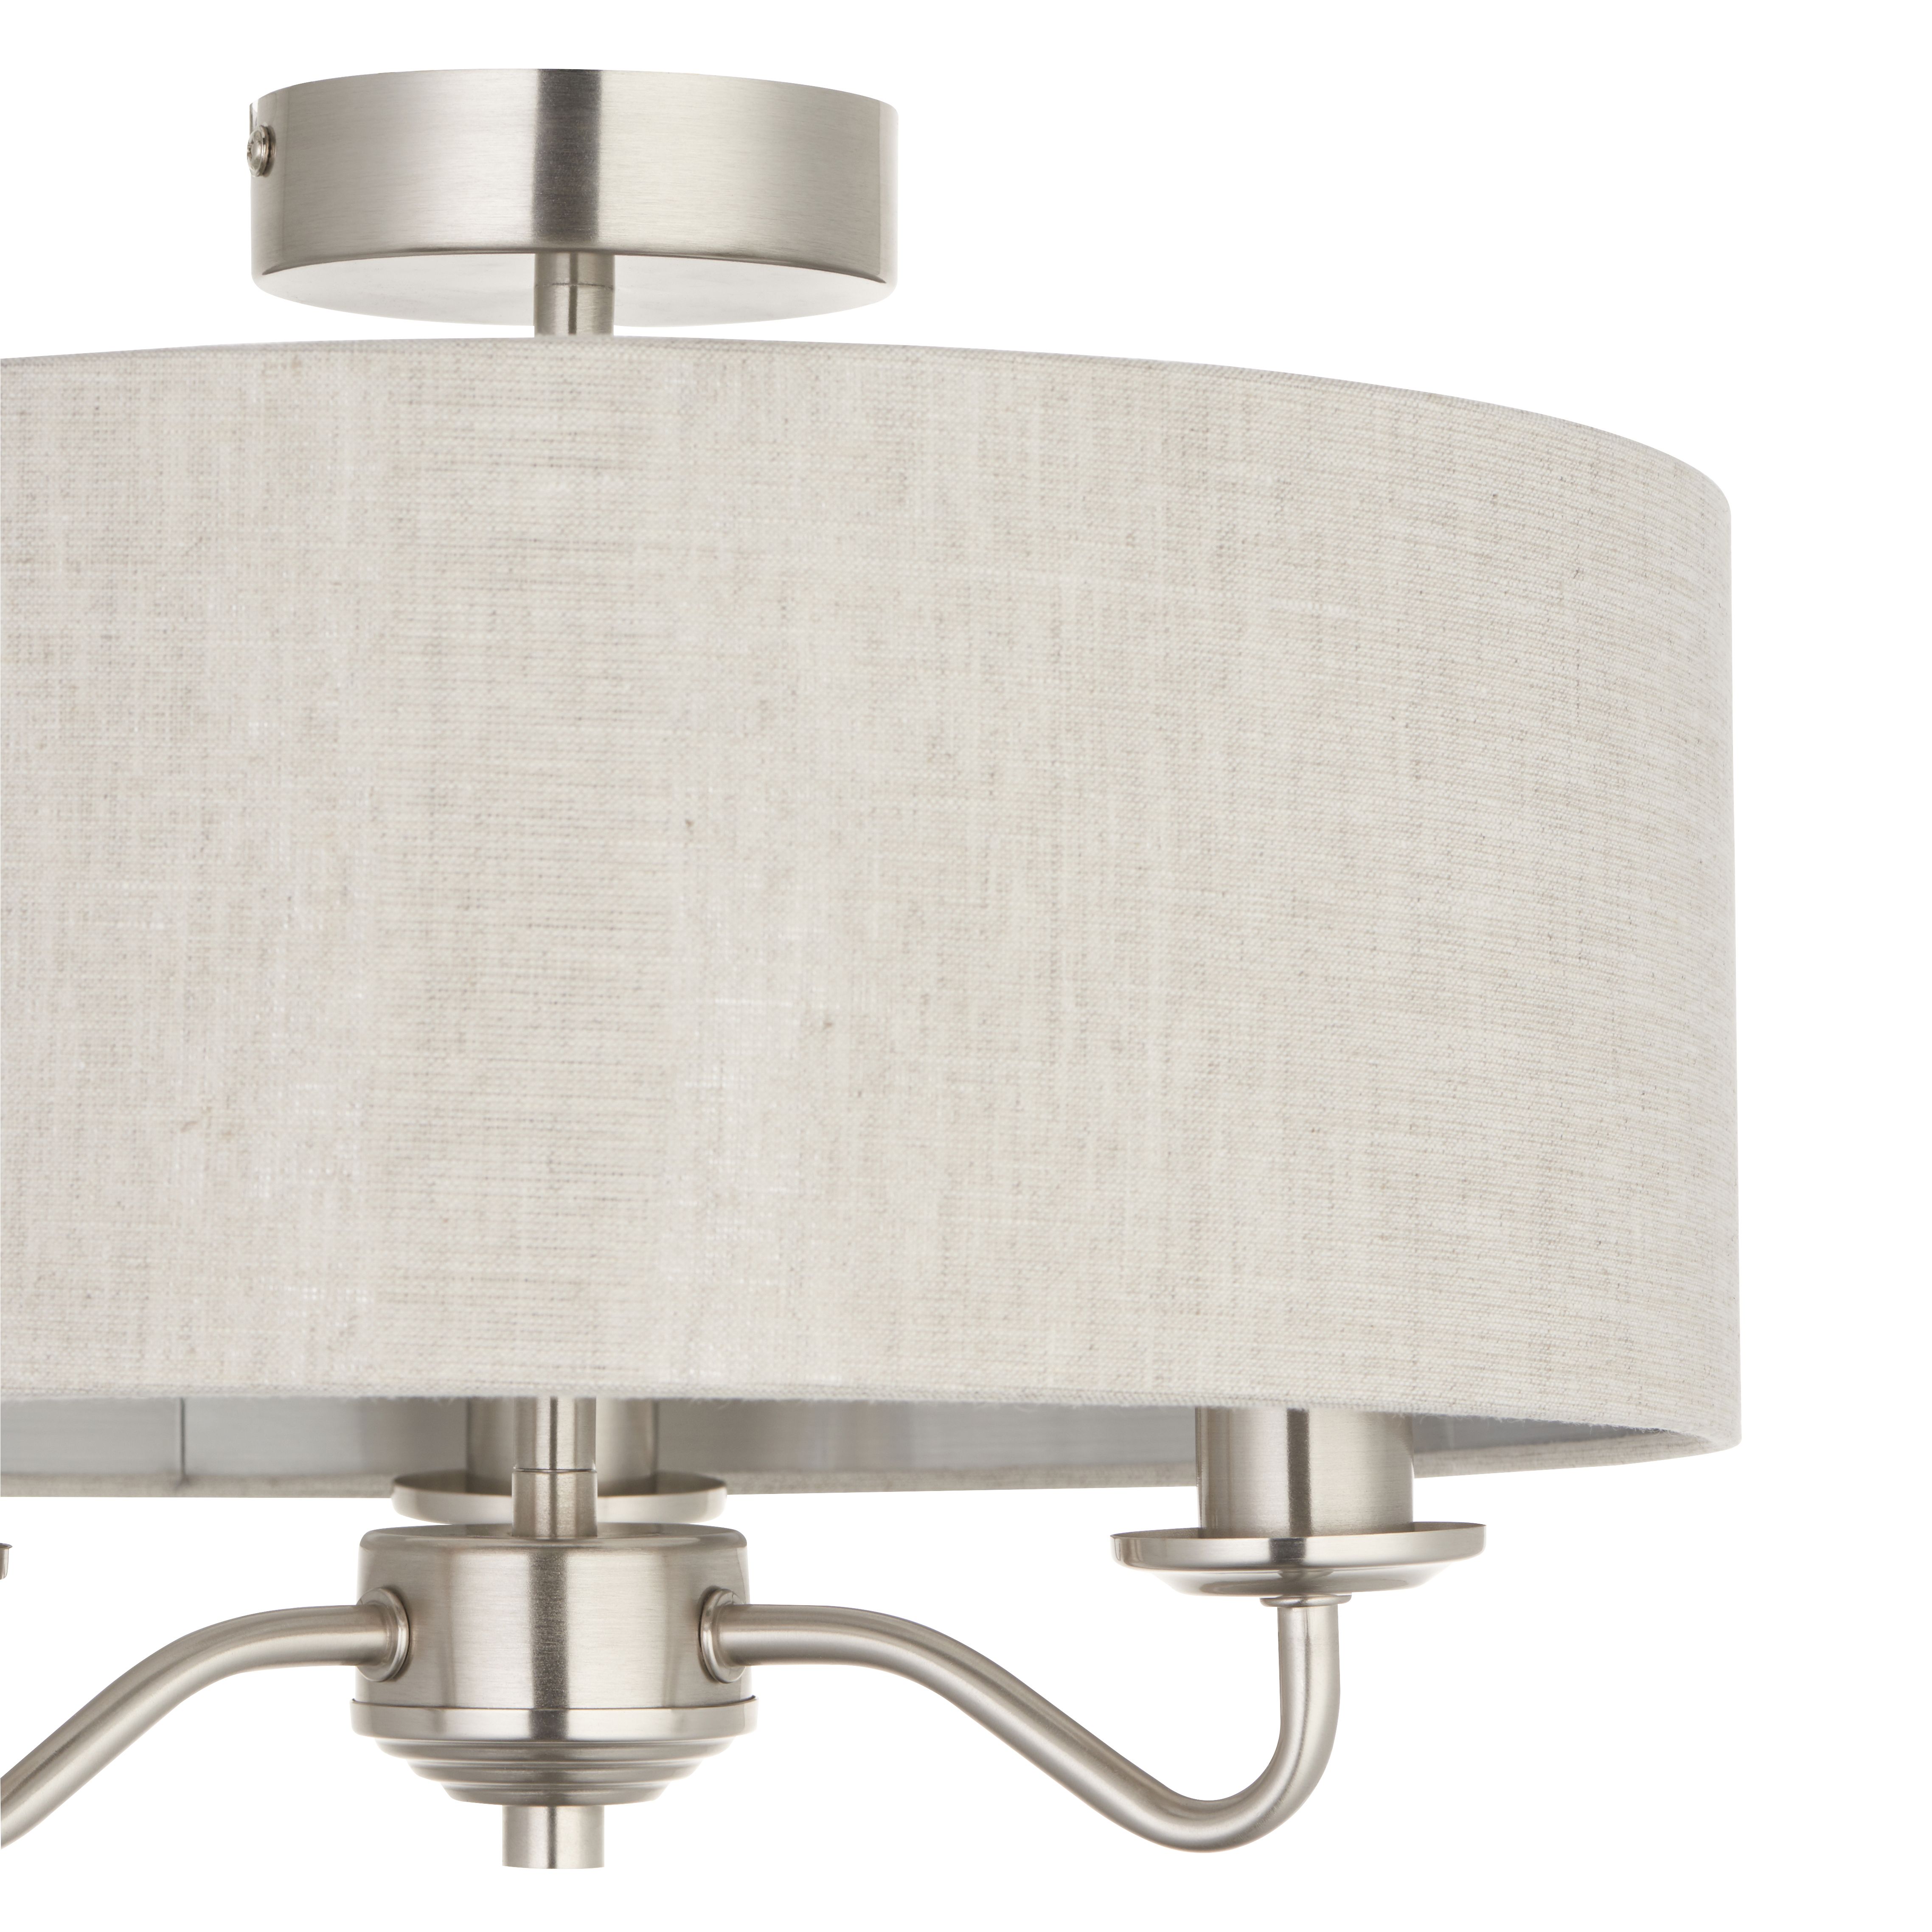 GoodHome Traditional Fabric & metal Nickel effect 3 Lamp Ceiling light